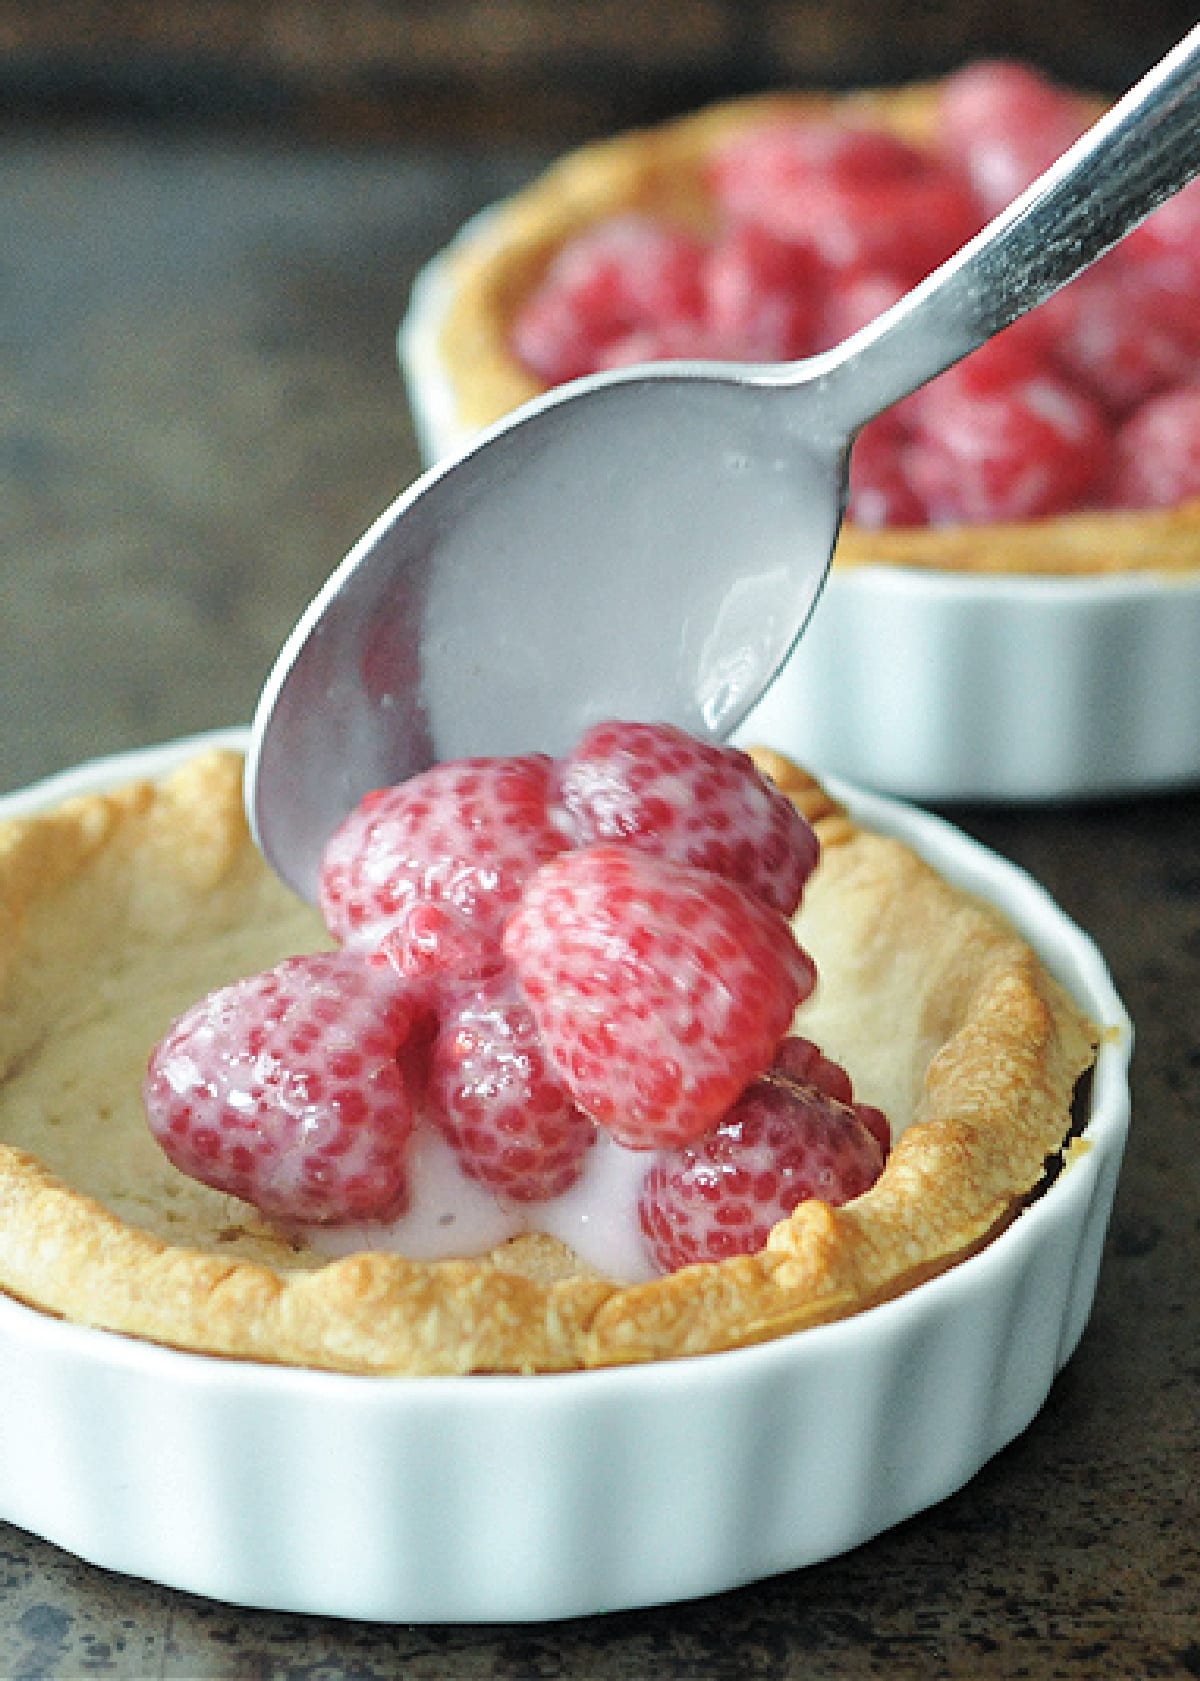 How to make raspberry crumble pie: a spoon adding raspberries and cream to a par-baked pie crust.